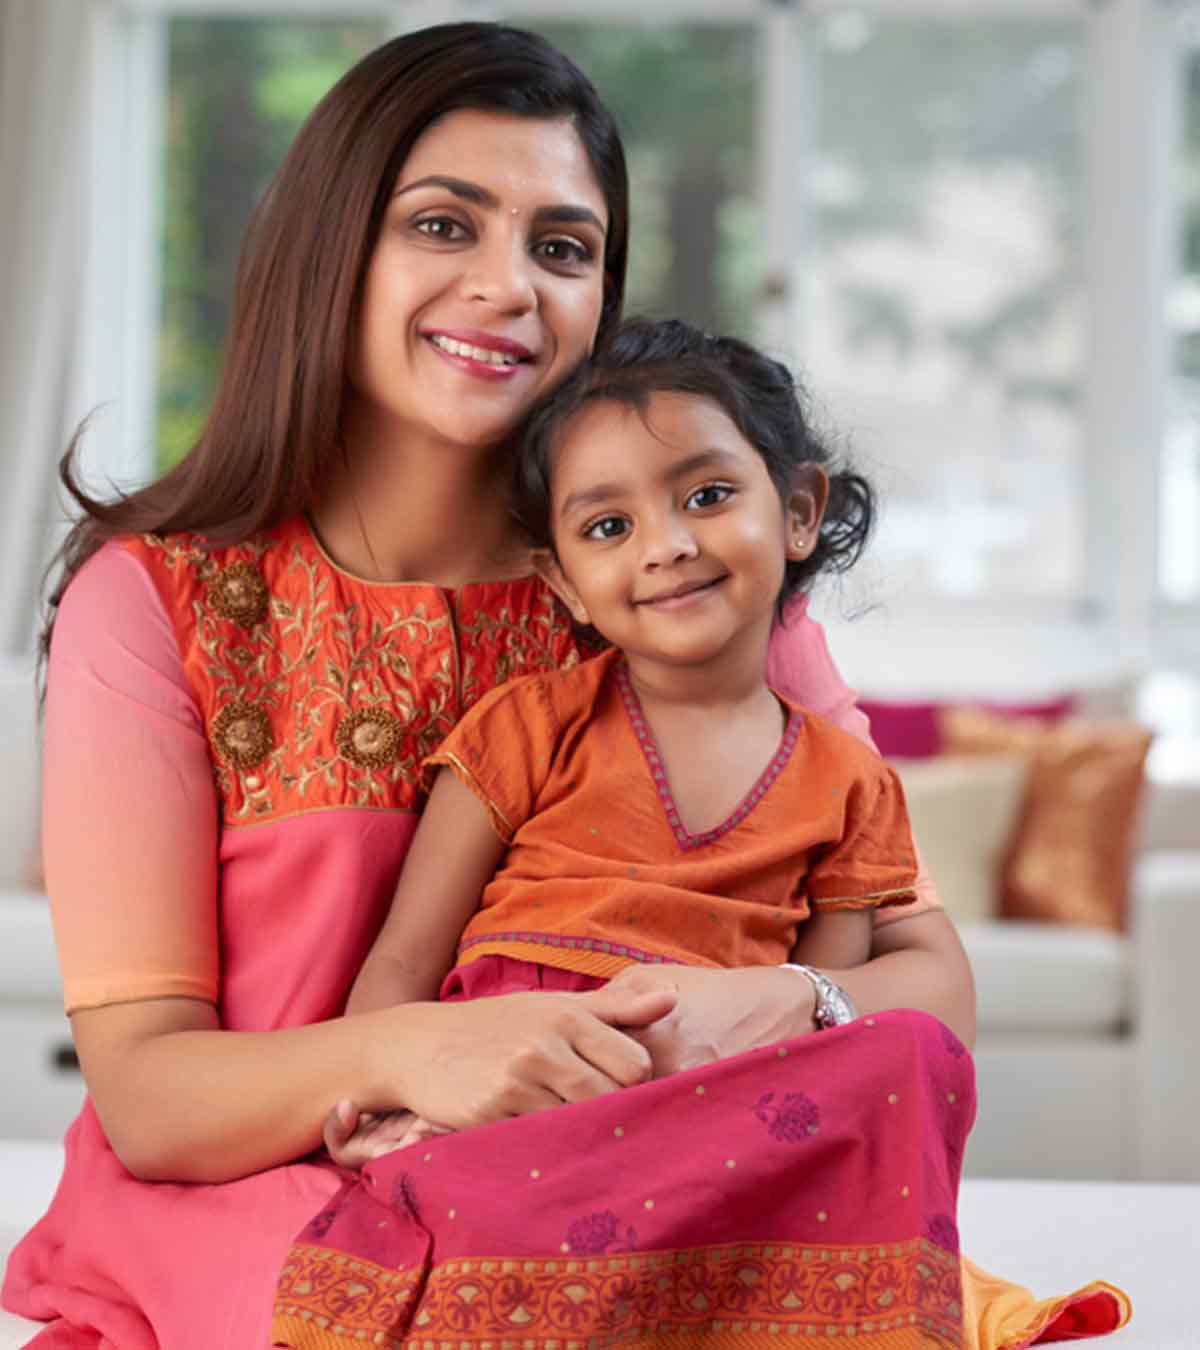 My Motherhood Is Not Defined By The Bindi, But By My Love!